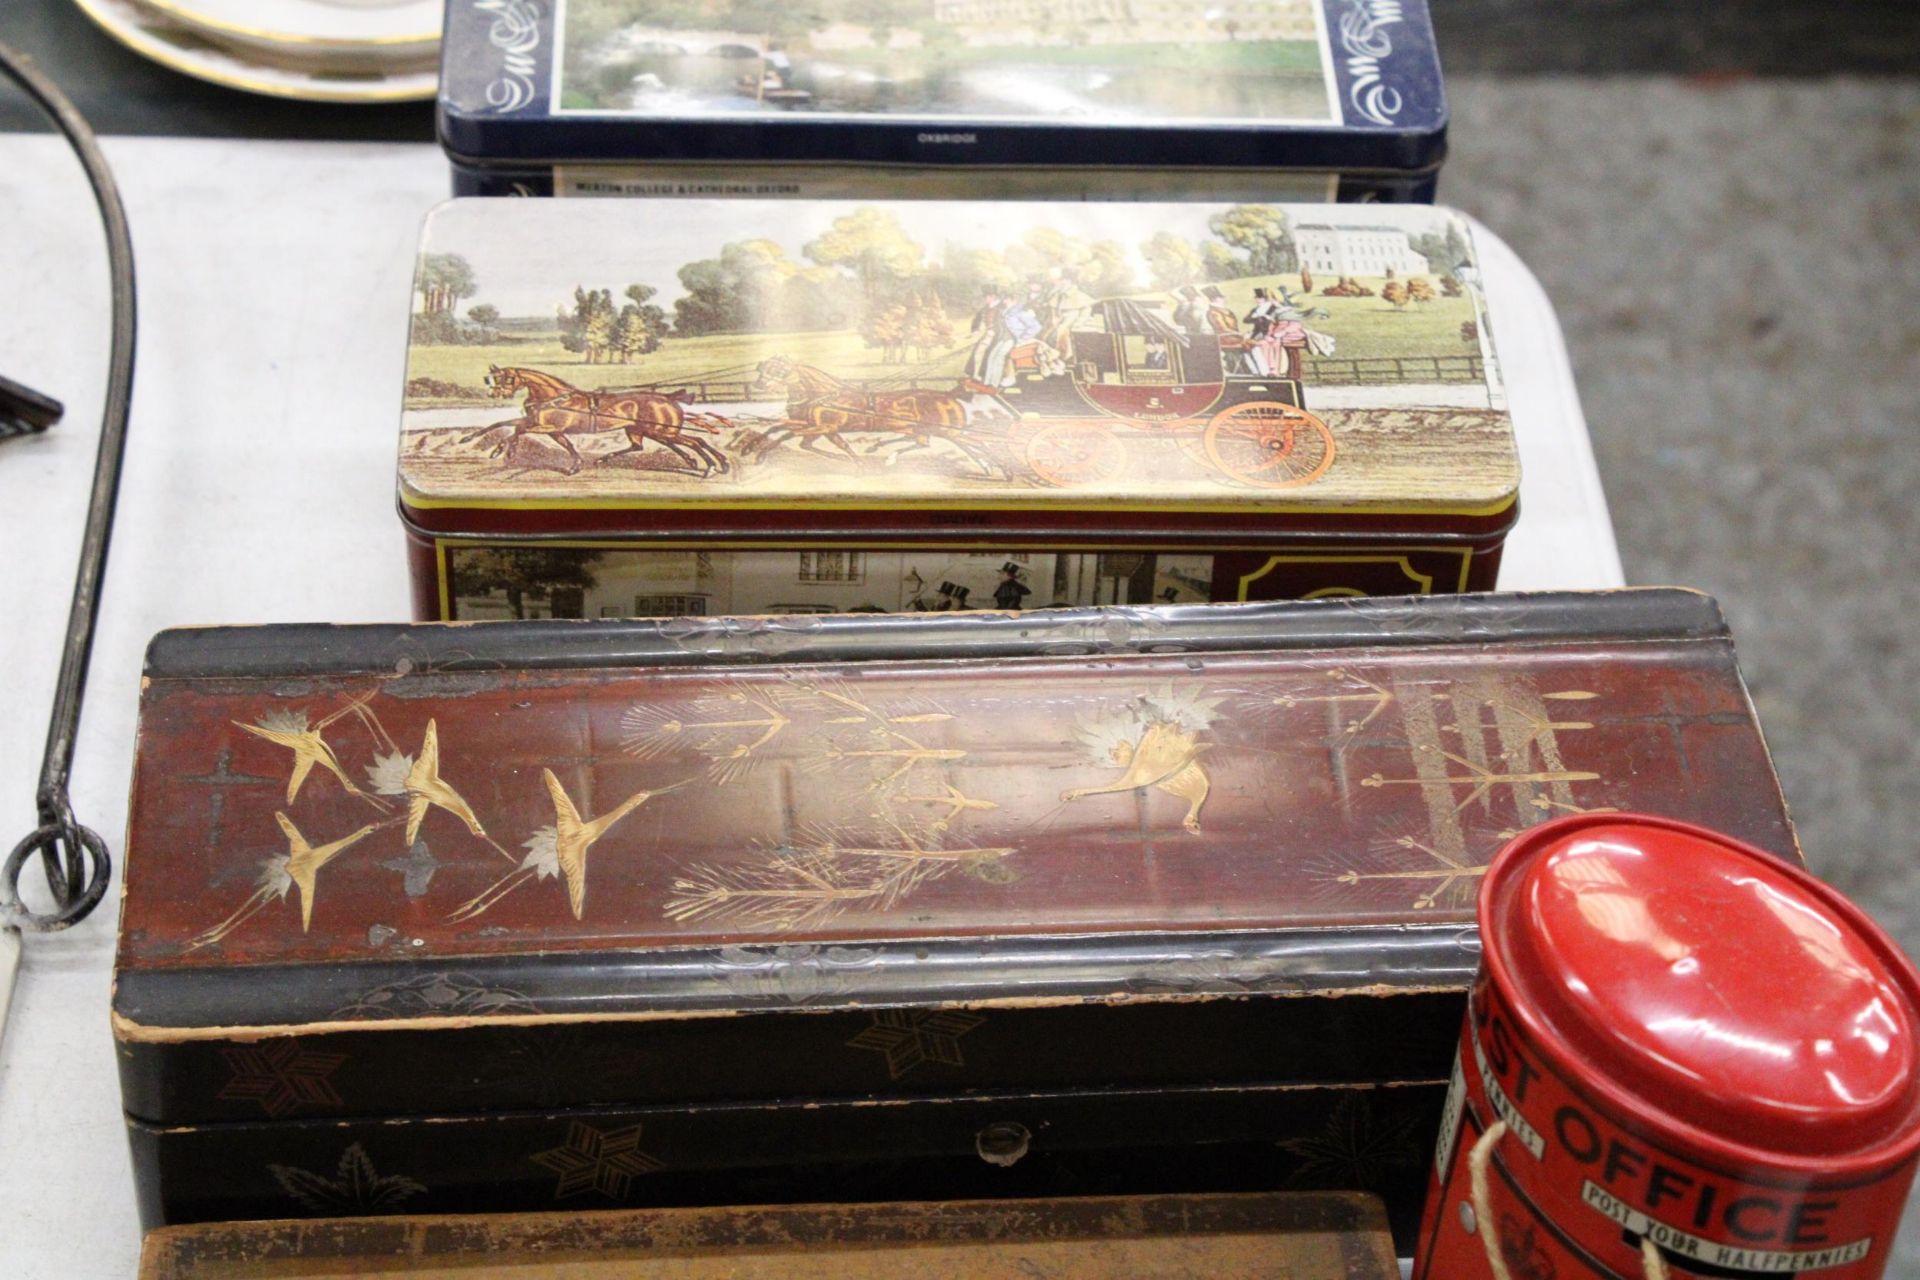 NINE VINTAGE TINS AND BOXES TO INCLUDE A POST BOX MONEY BOX, CASH TIN, PENCIL BOX, GLOVE BOX, ETC - Image 4 of 6